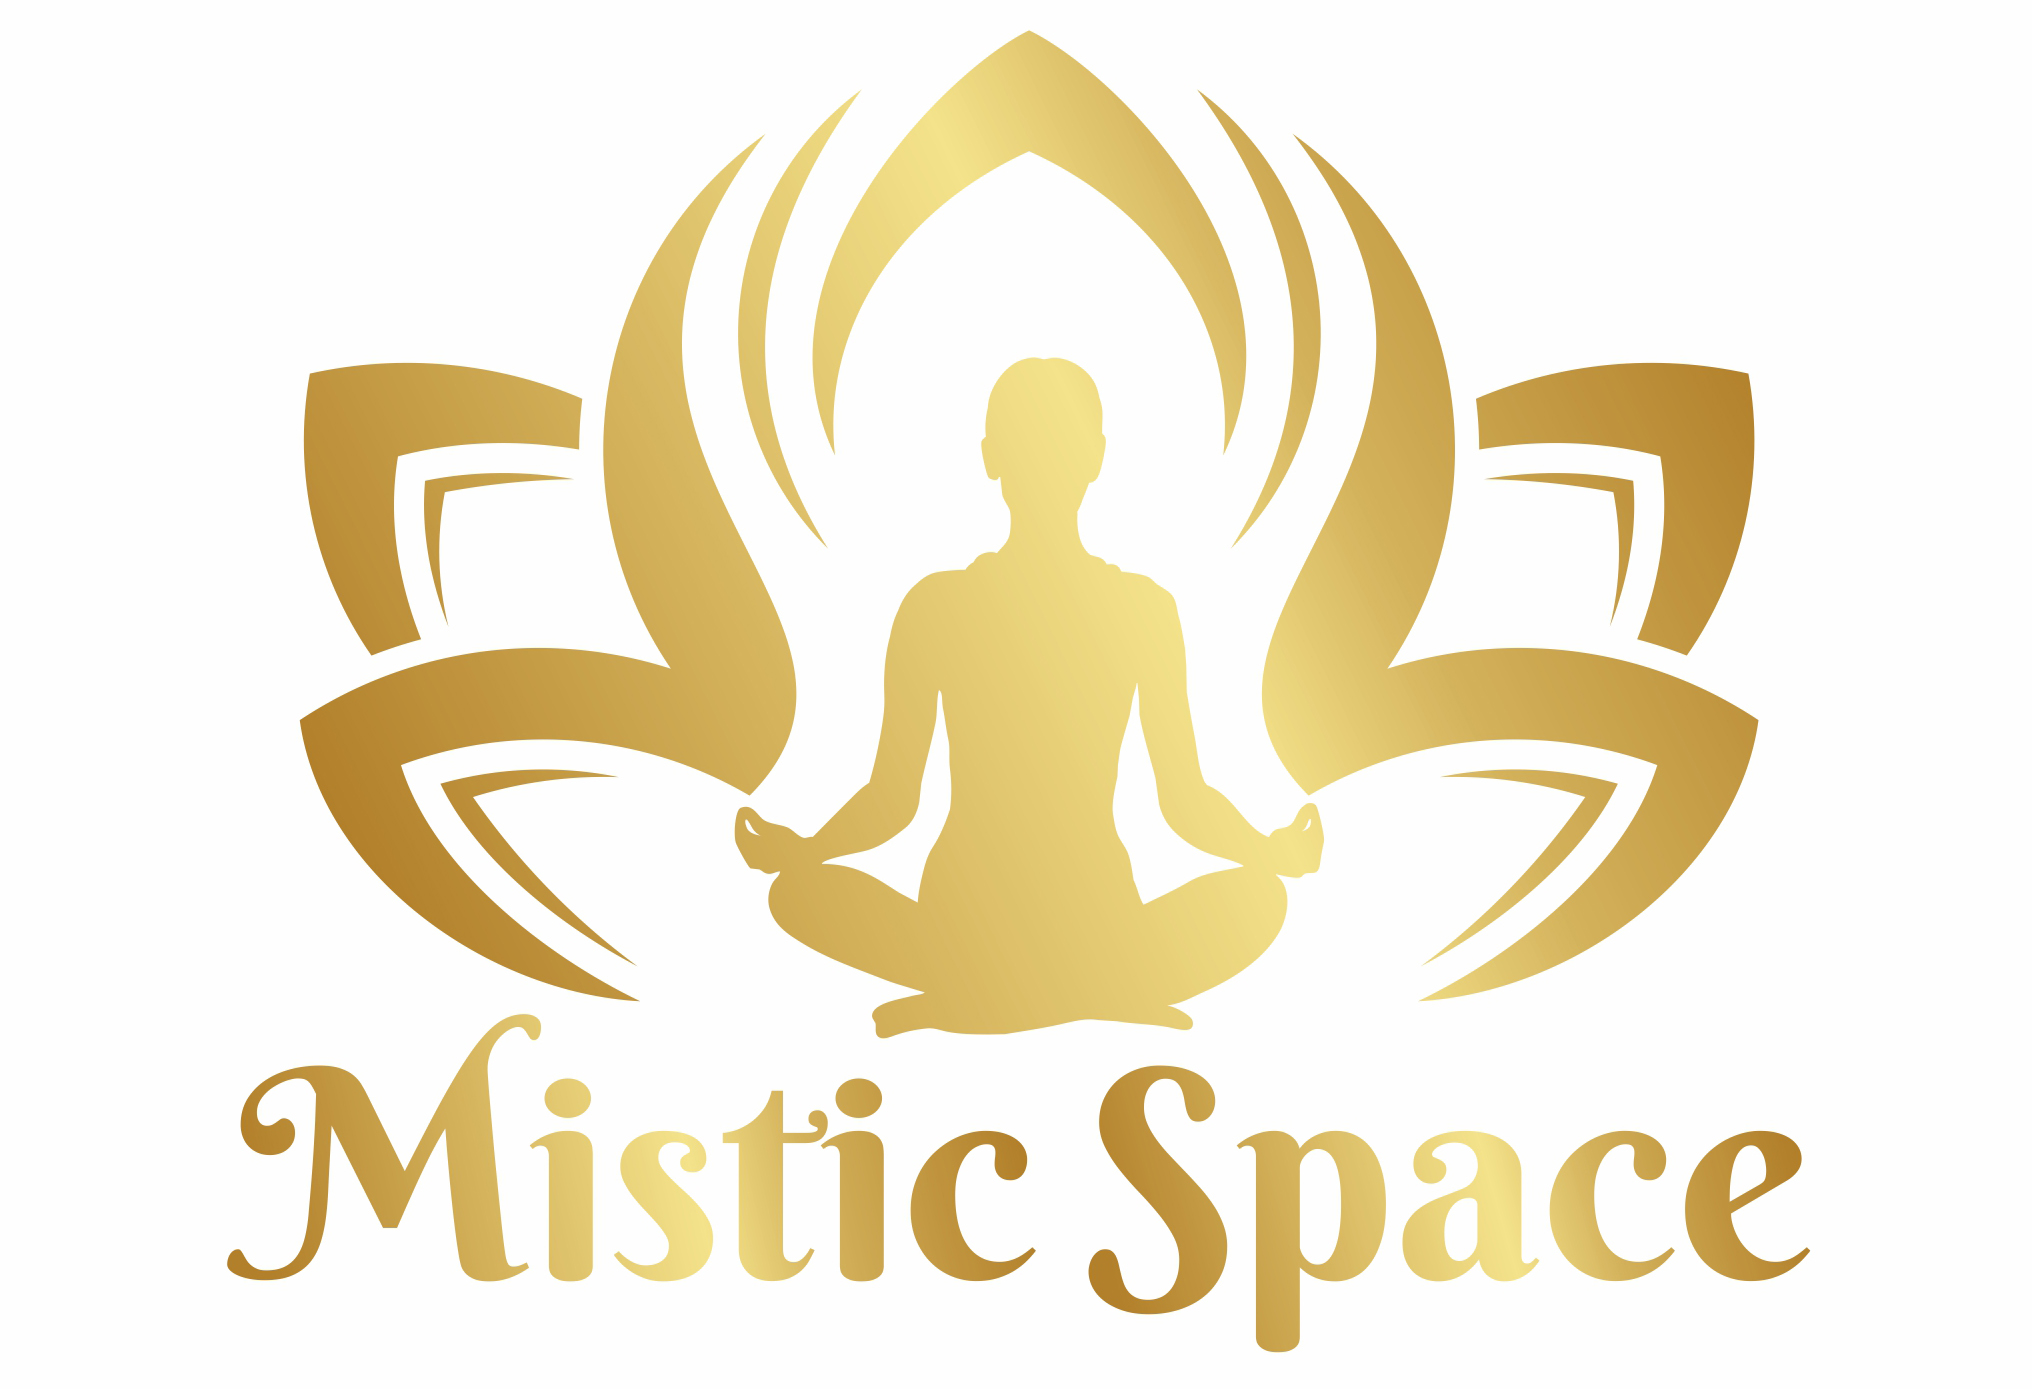 Mistic Space